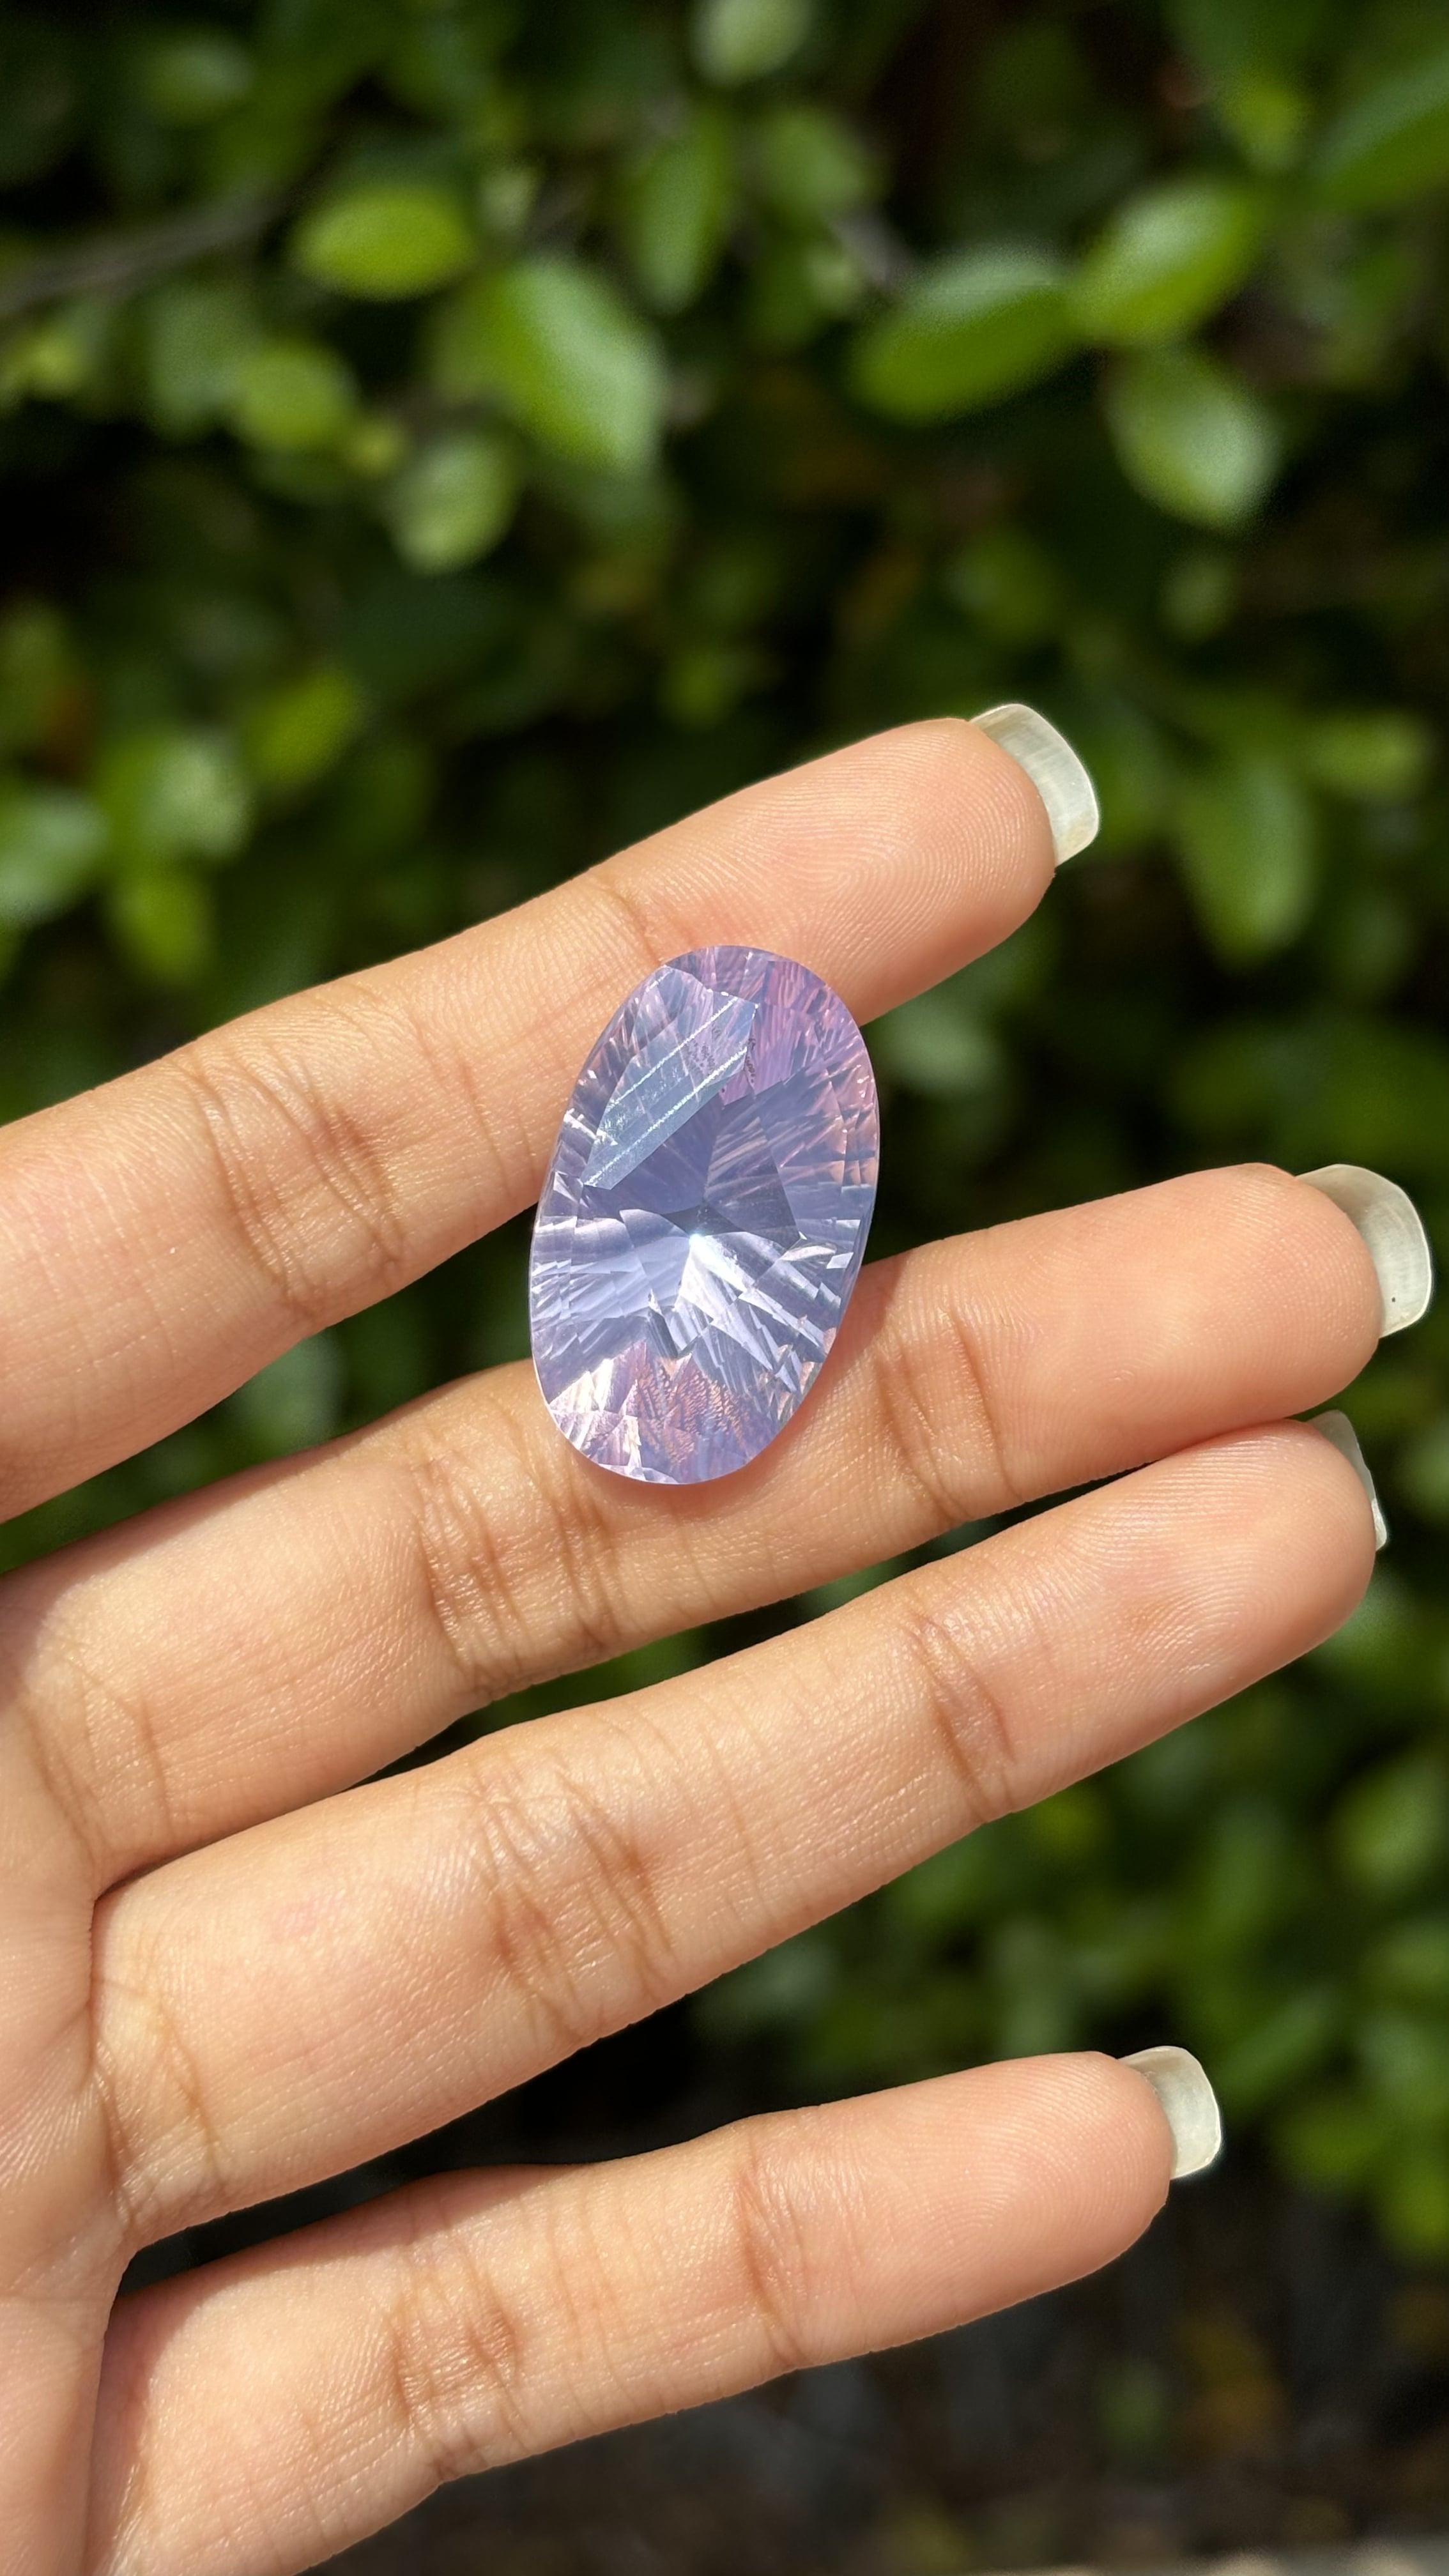 A mesmerising 26.38 Carat Amethyst gemstone. It is completely natural and it is a clean stone.  The amethyst has a unique and breath-taking pastel purple color that is sure to allure you at first sight! The amethyst is cut to perfection in a